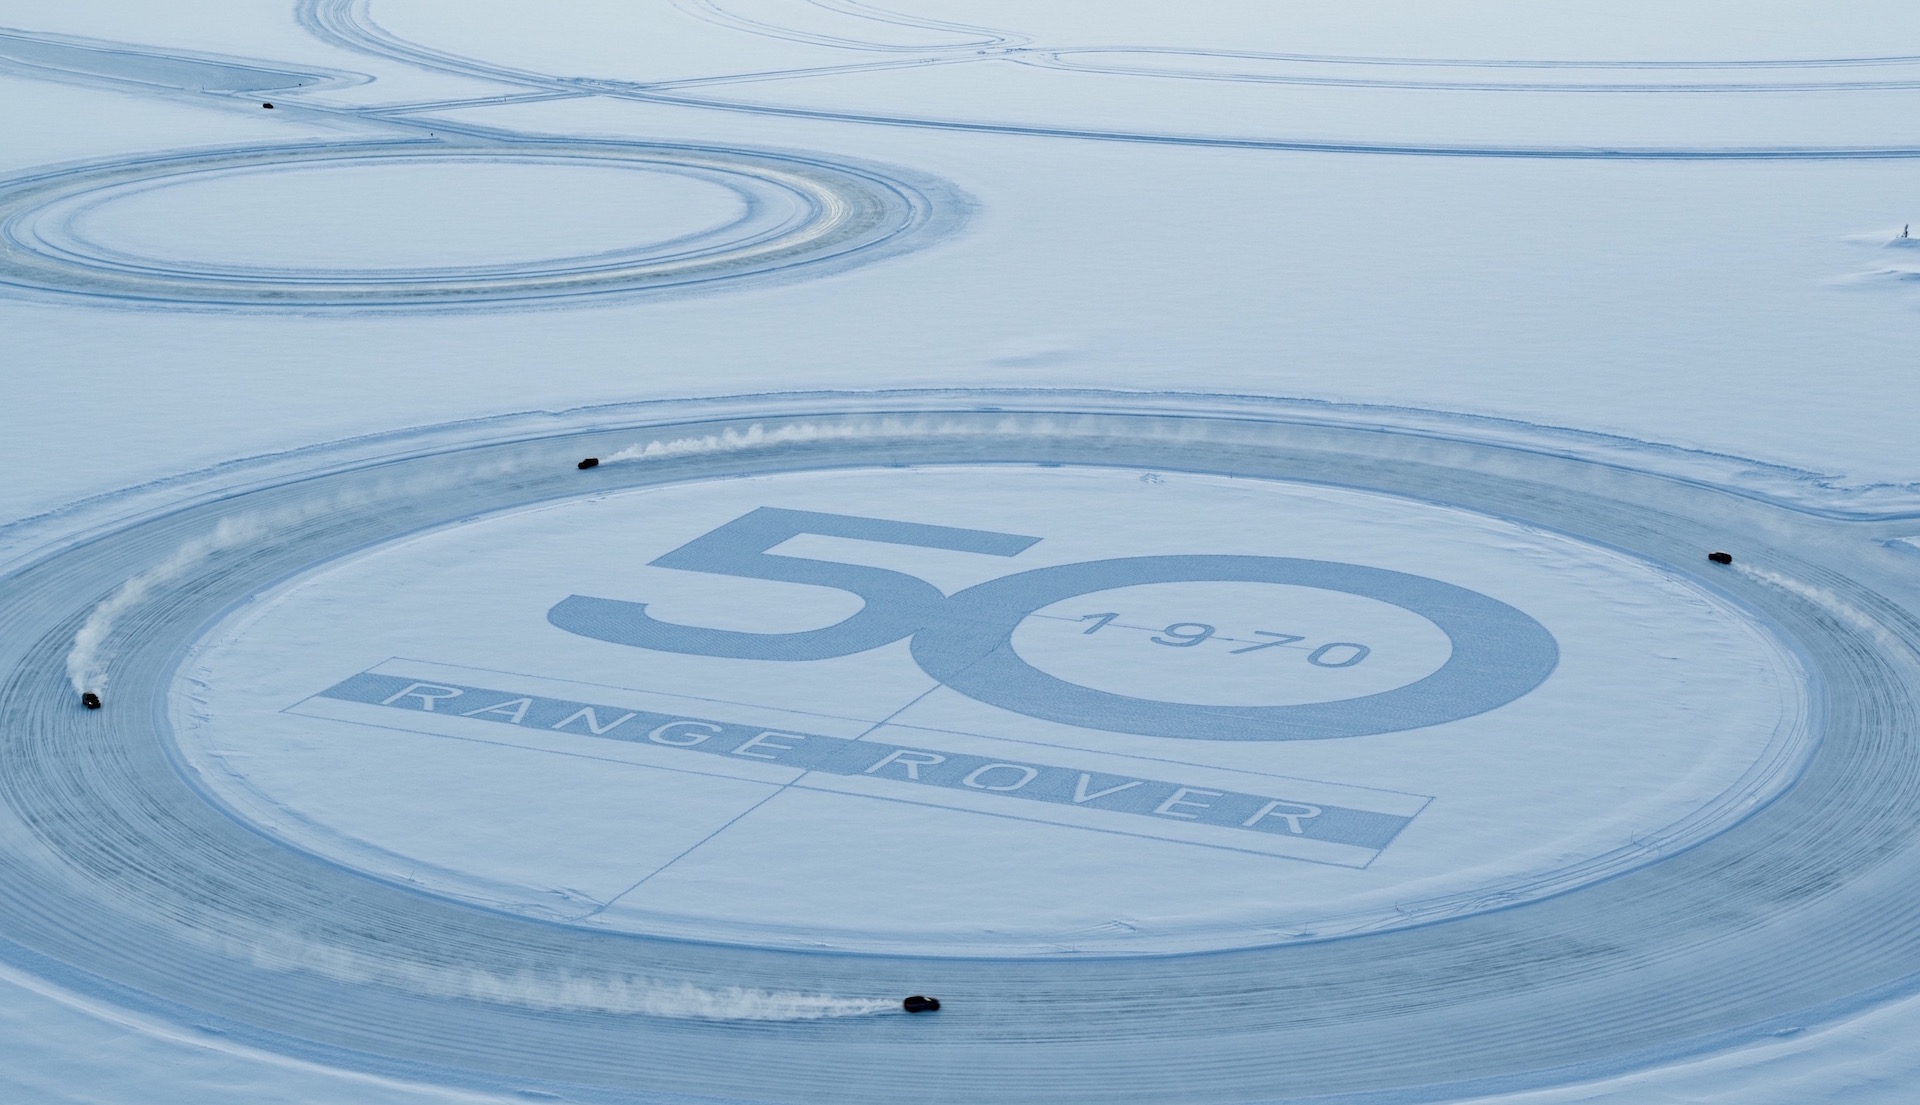 Range Rover does donuts on ice to celebrate 50th anniversary